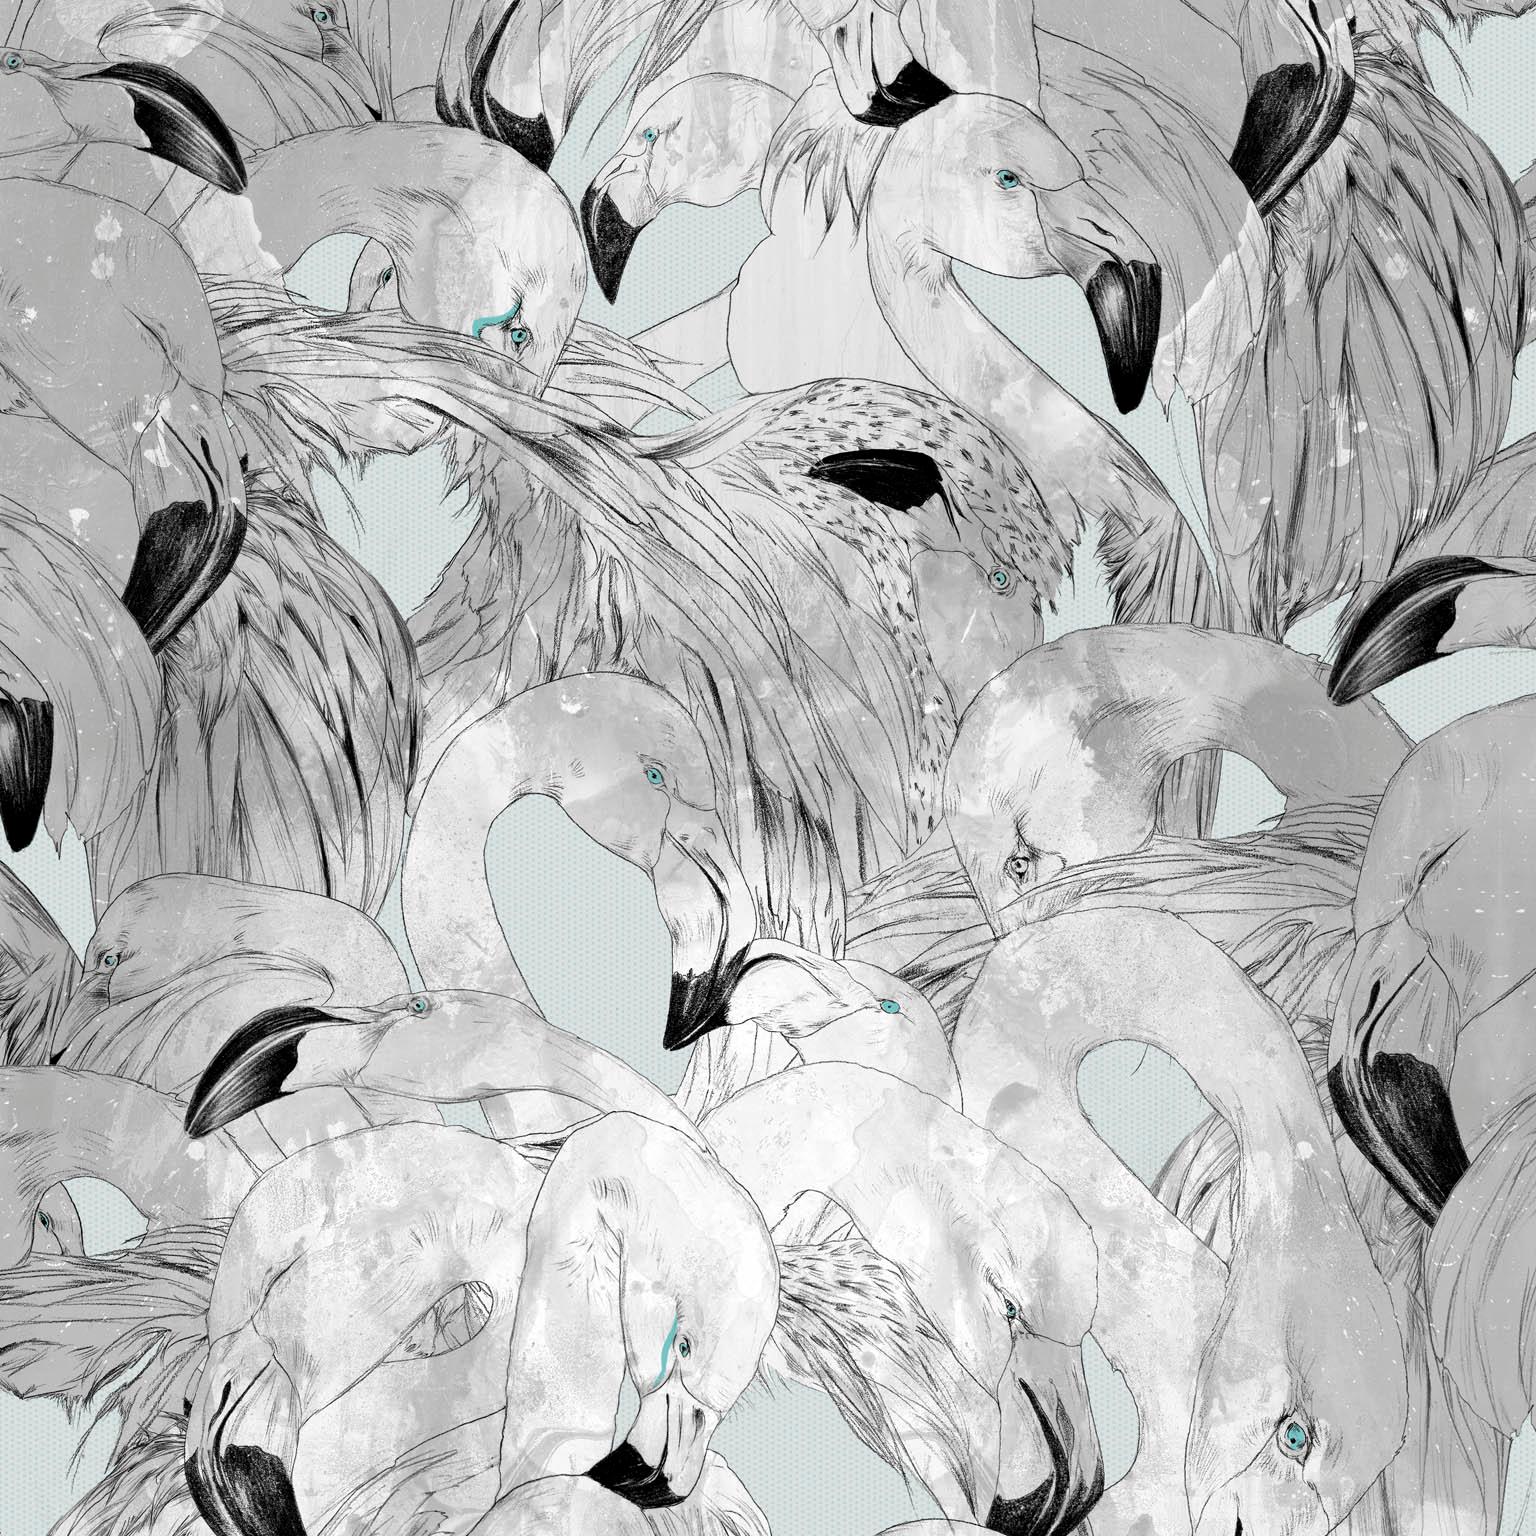 Delivering a colony of artistic styles, 17 patterns flamingo wallpaper presents a fresh yet traditional interpretation of one of natures most inspiring birds. Swapping the mudflats of Africa for the ink pools of London, 17 Patterns gently bathes the